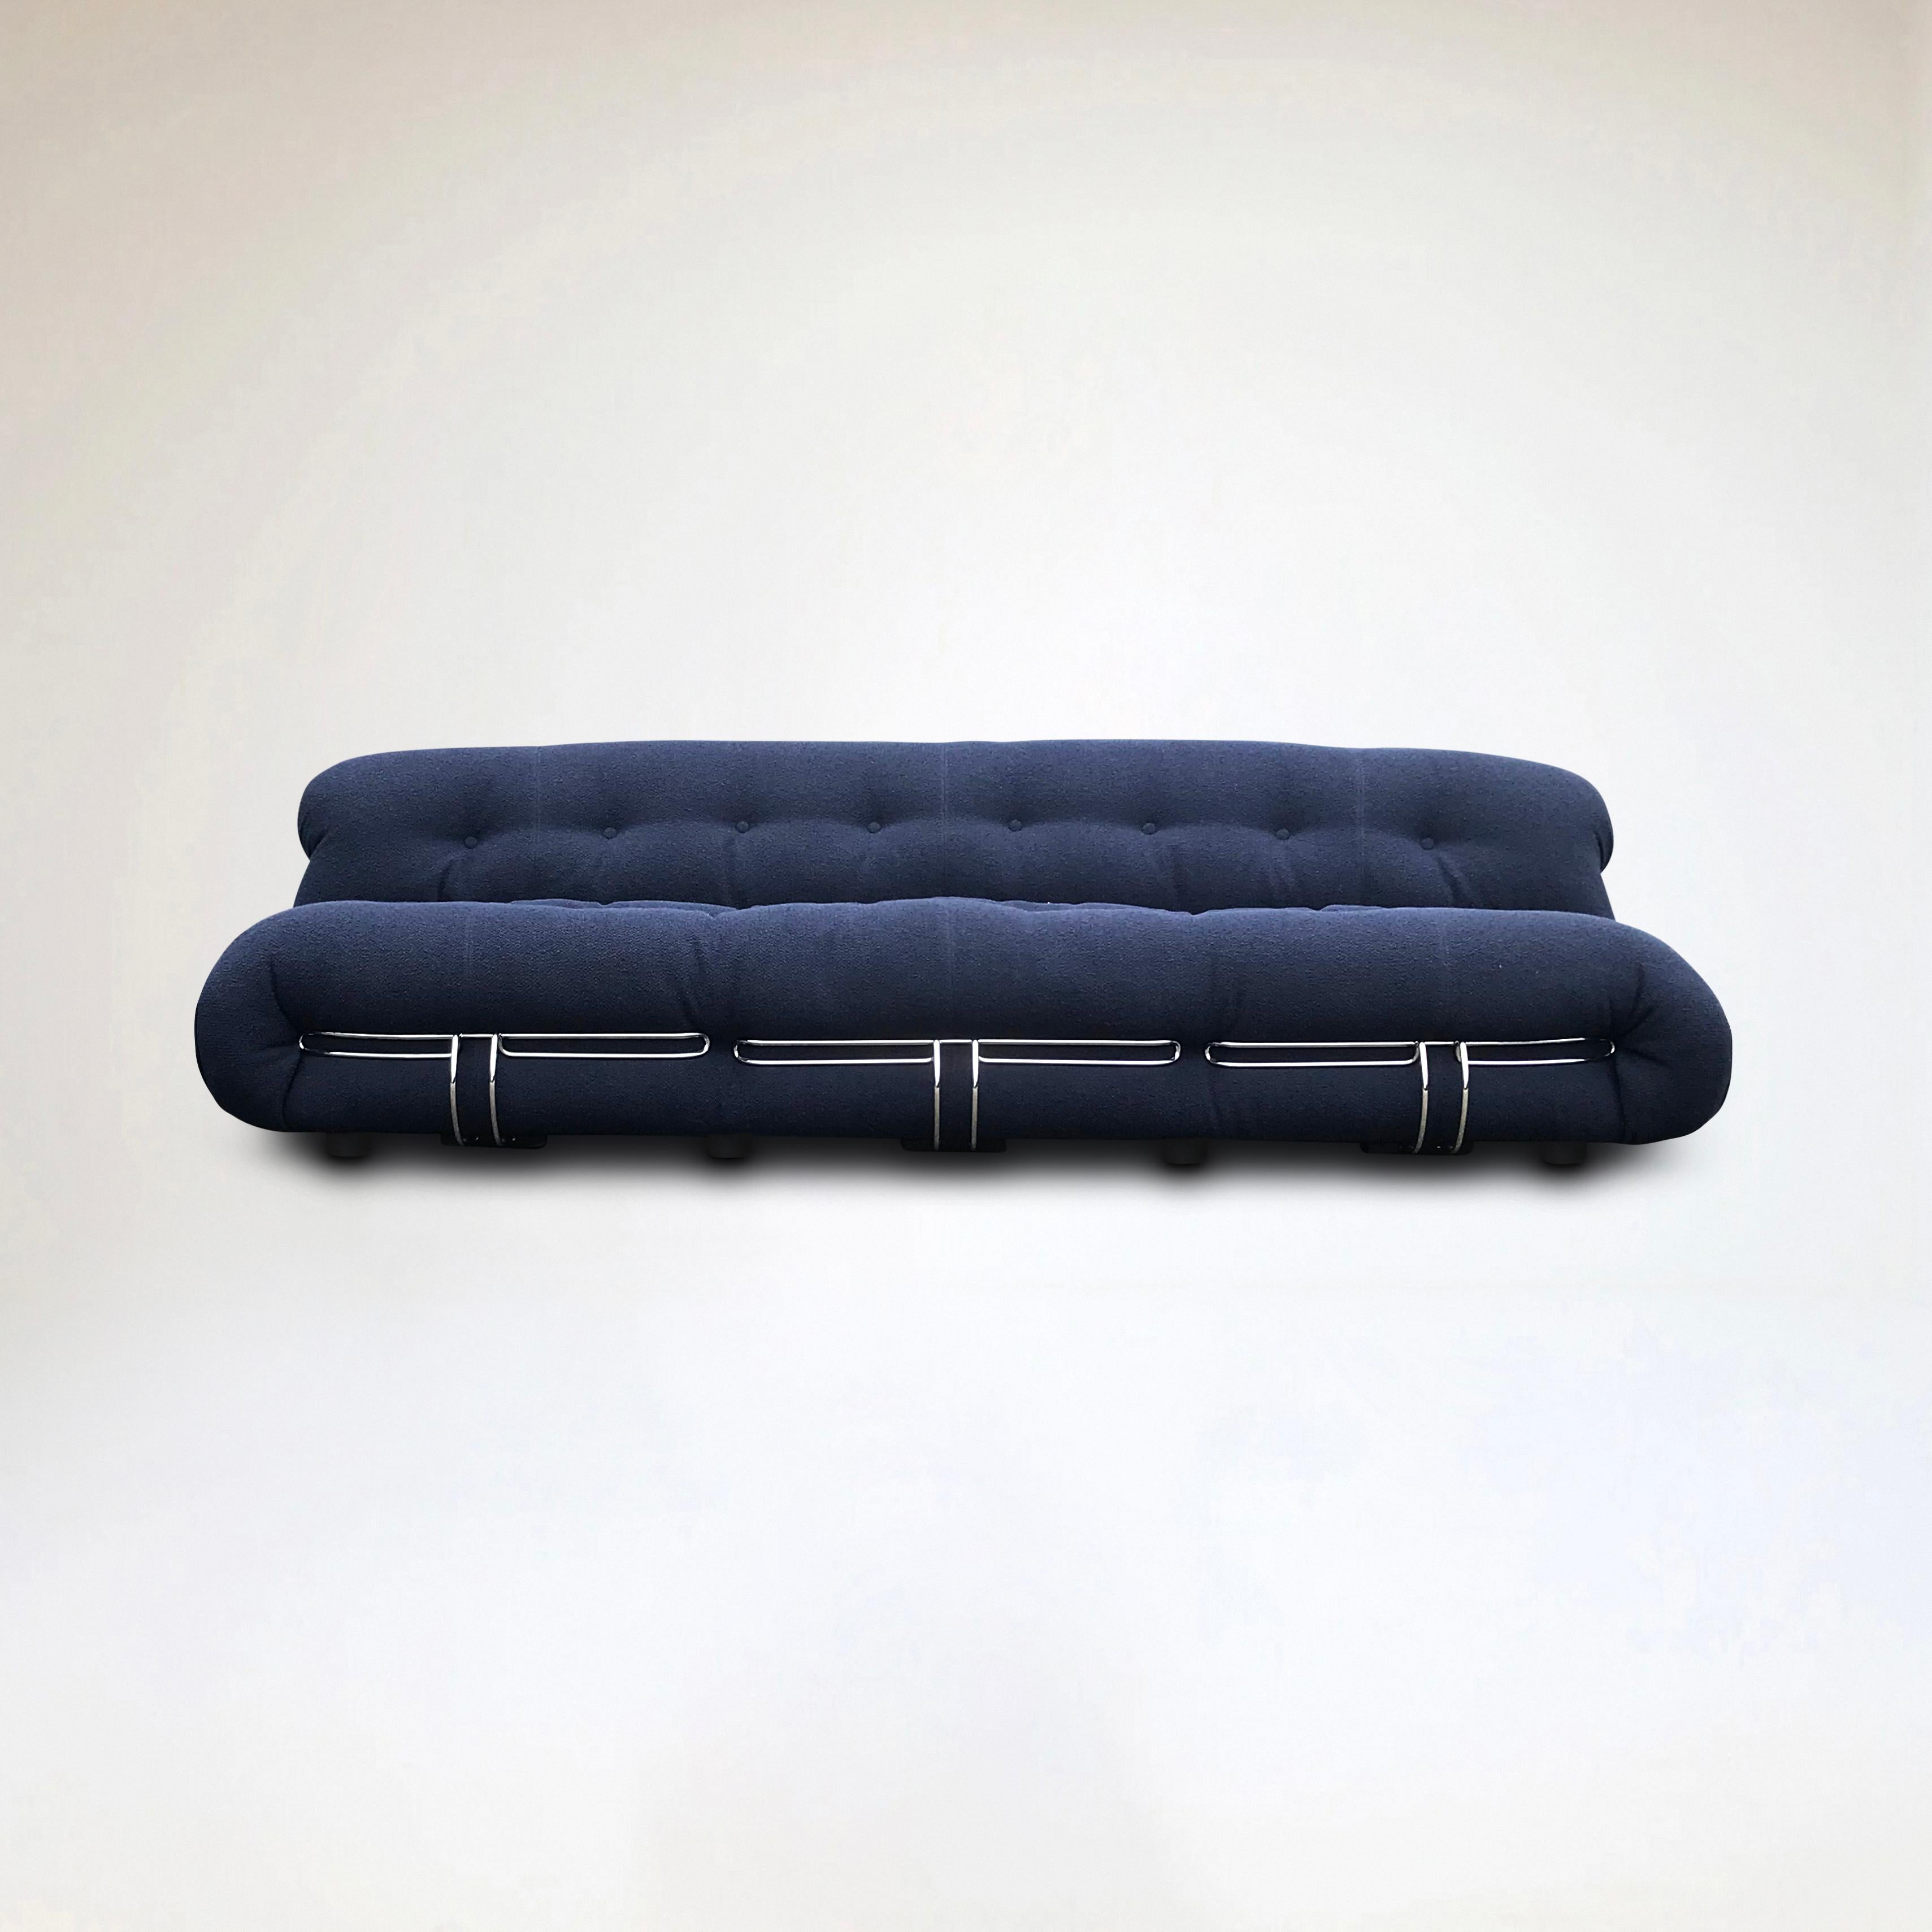 The Soriana Sofa was first designed by Afra and Tobia Scarpa in 1969.

In 1970 the Soriana was awarded a Compasso d’Oro prize solidifying its standing as a style icon. Defined by its voluminous curves, Soriana is wrapped, generously with a fixed